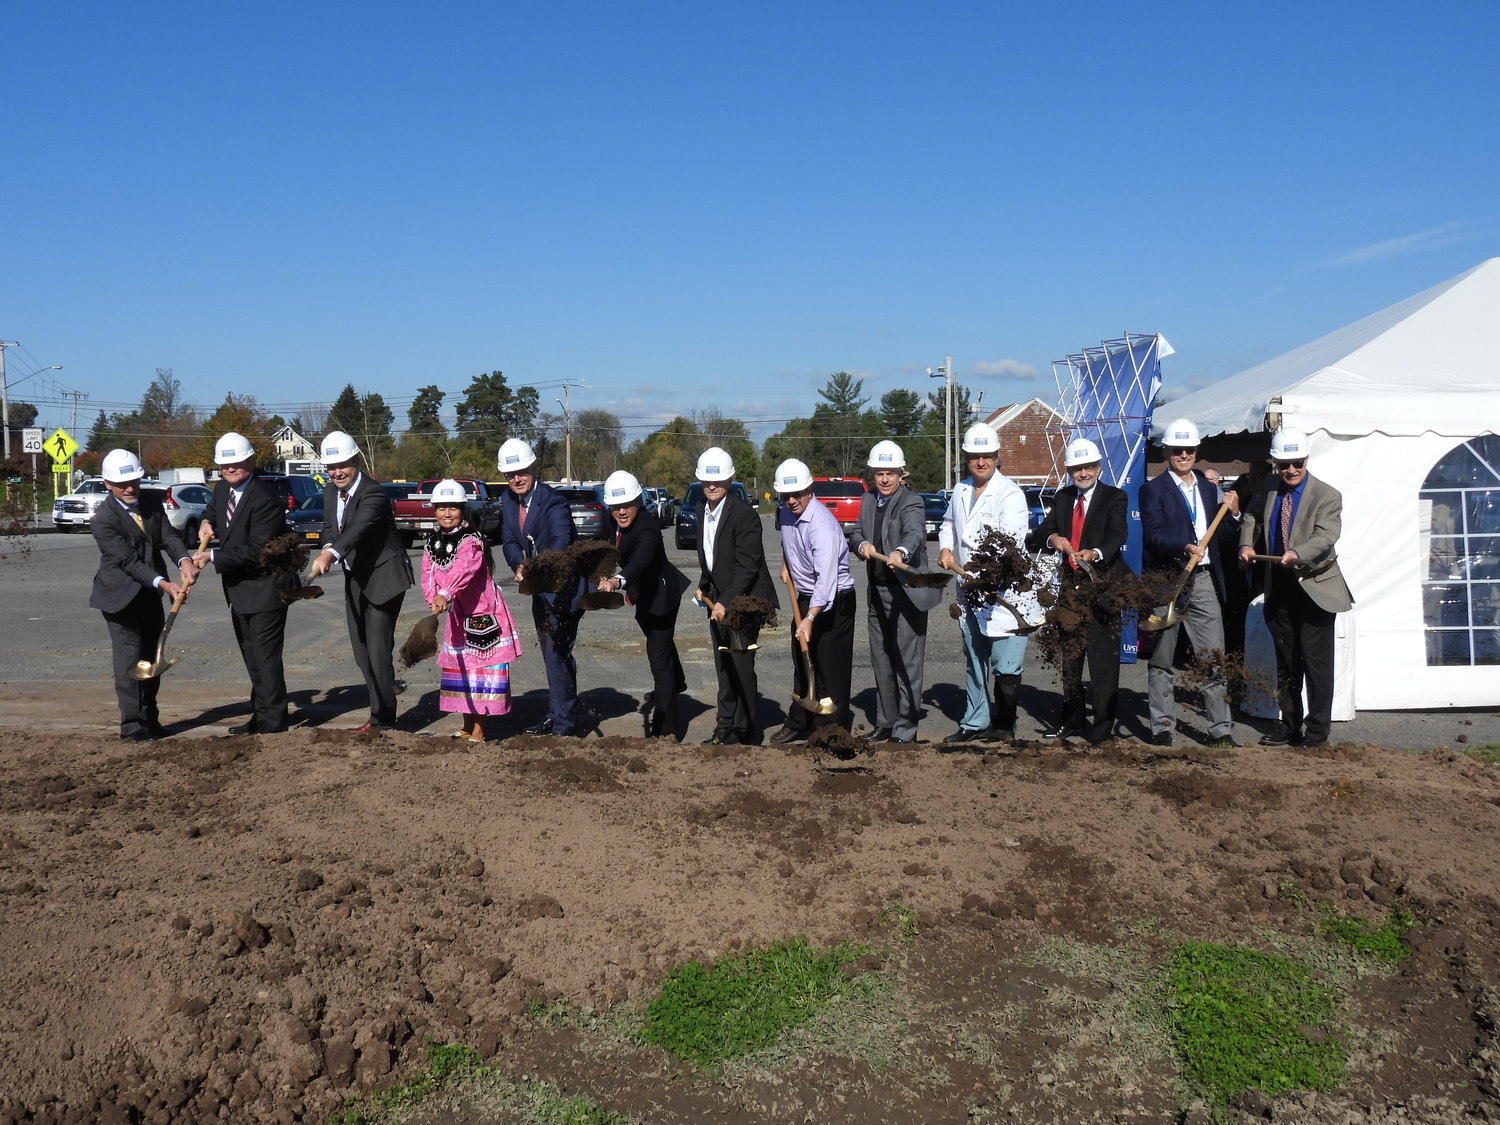 BREAKING GROUND — Local officials, members of the Oneida Indian Nation, Upstate Medical University, and their supporters break ground at the site of the new Upstate Cancer Center in Verona, which is expected to open its doors in 2023.